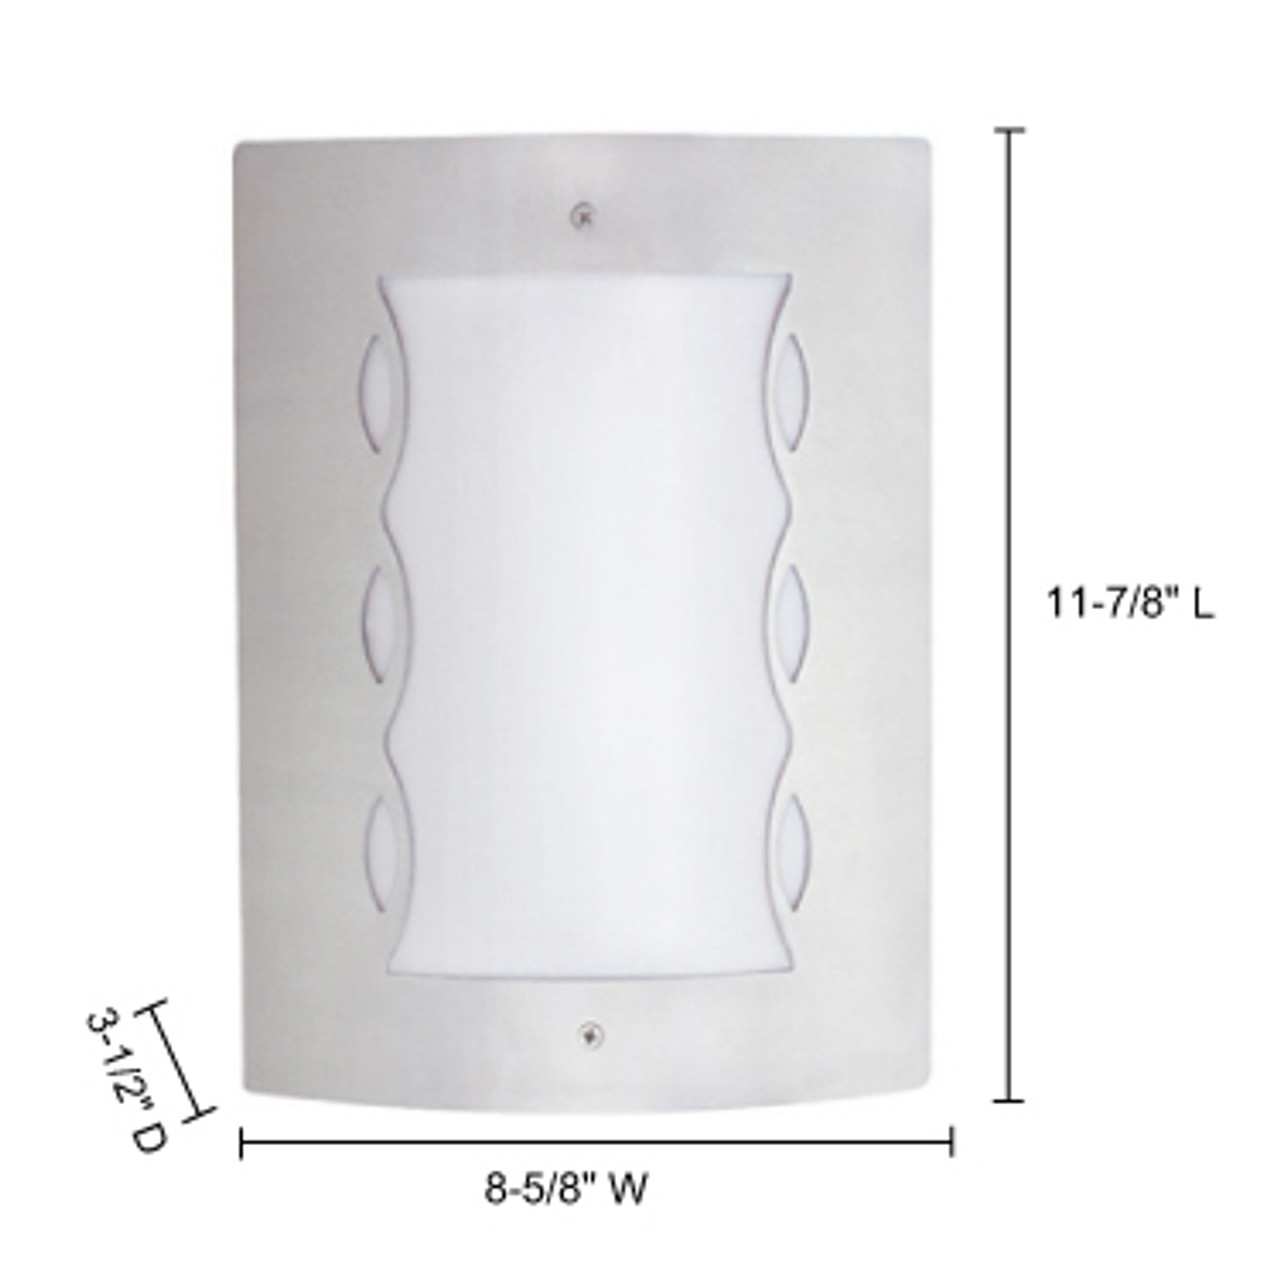 JESCO Lighting GS10S72 60W Wall Sconce series. Brushed stainless steel With Opal White Acrylic, Silver